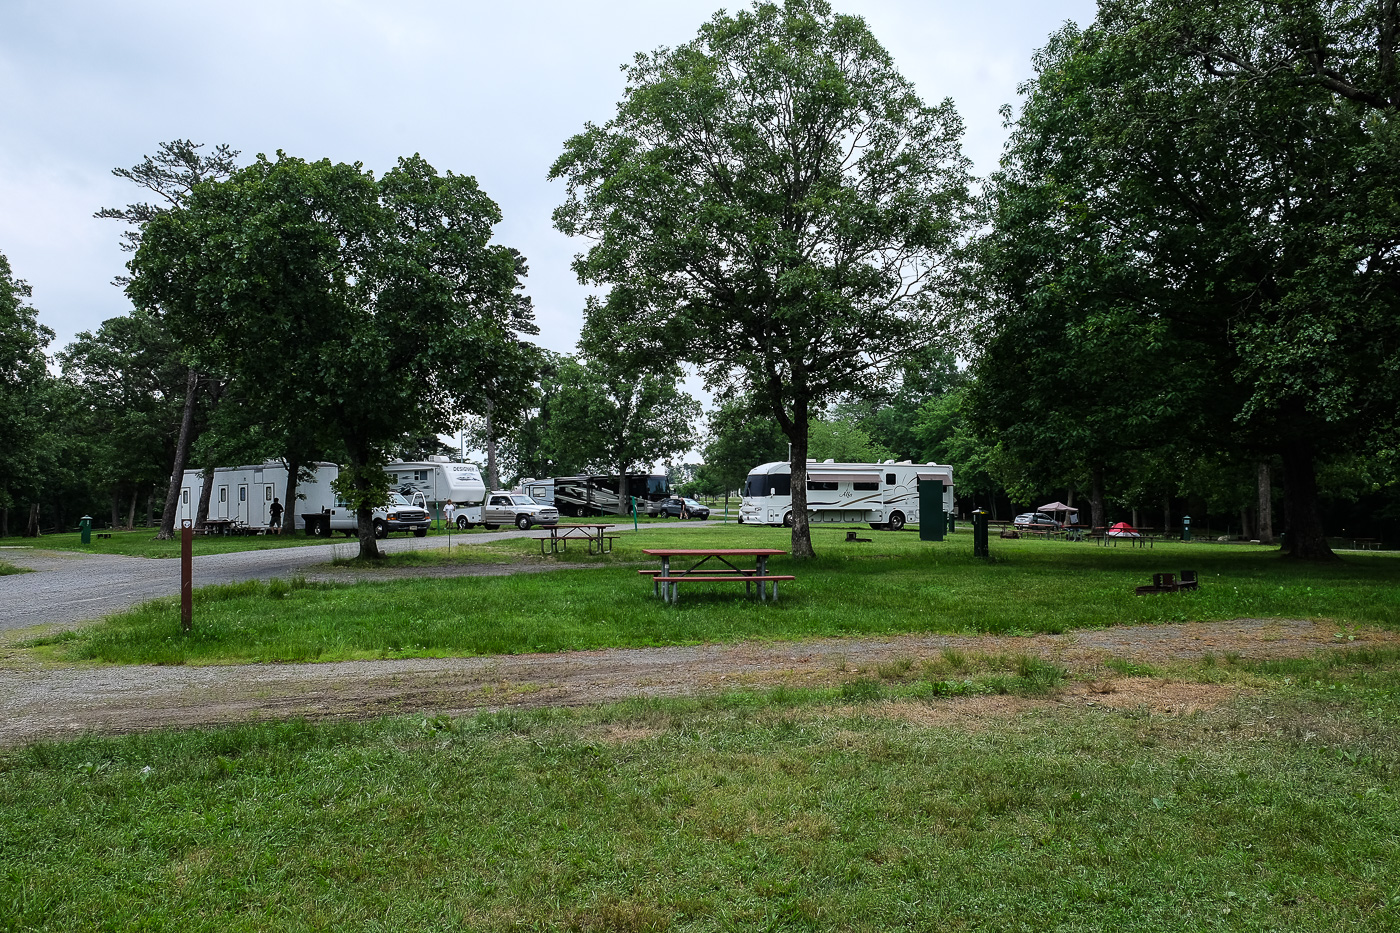 Lake Fairfax Park Campground Review Great Option Near Washington Dc Boxy Colonial On The Road 1157